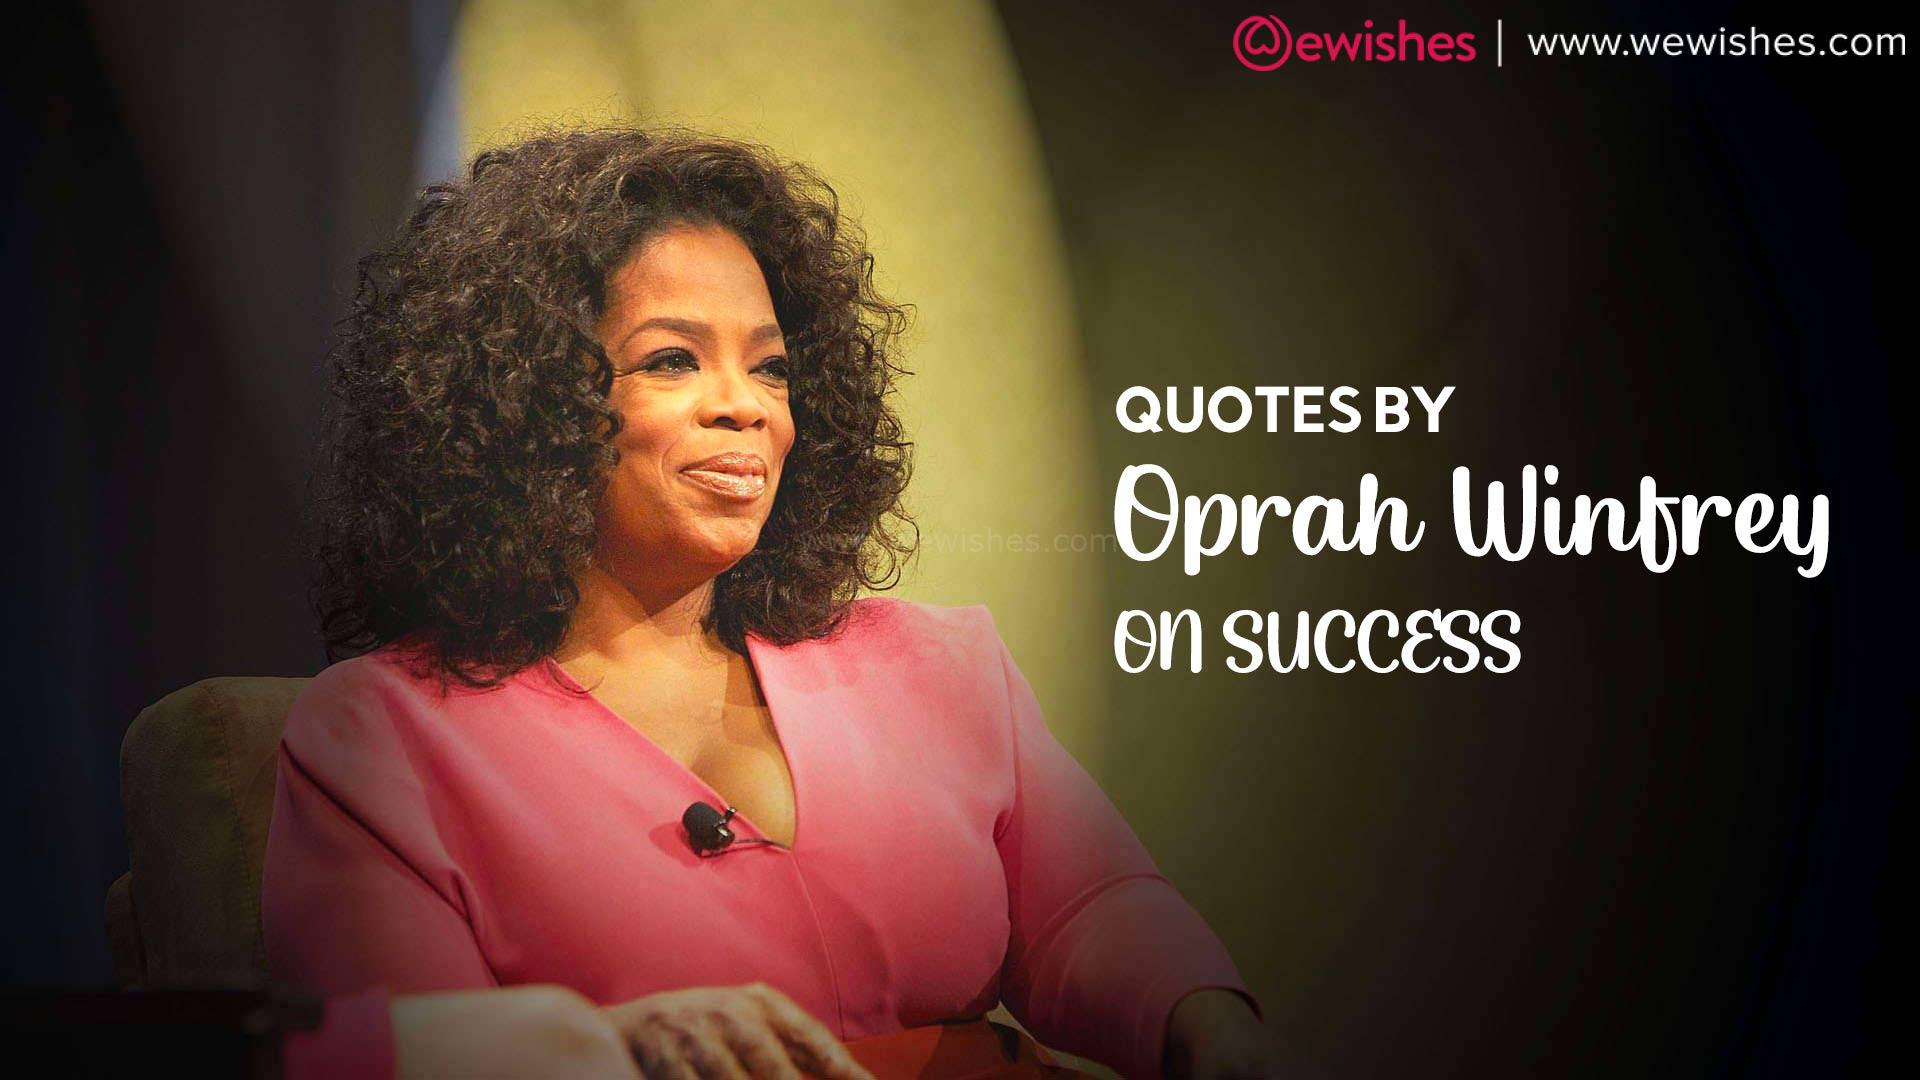 Quotes by Oprah Winfrey on Success